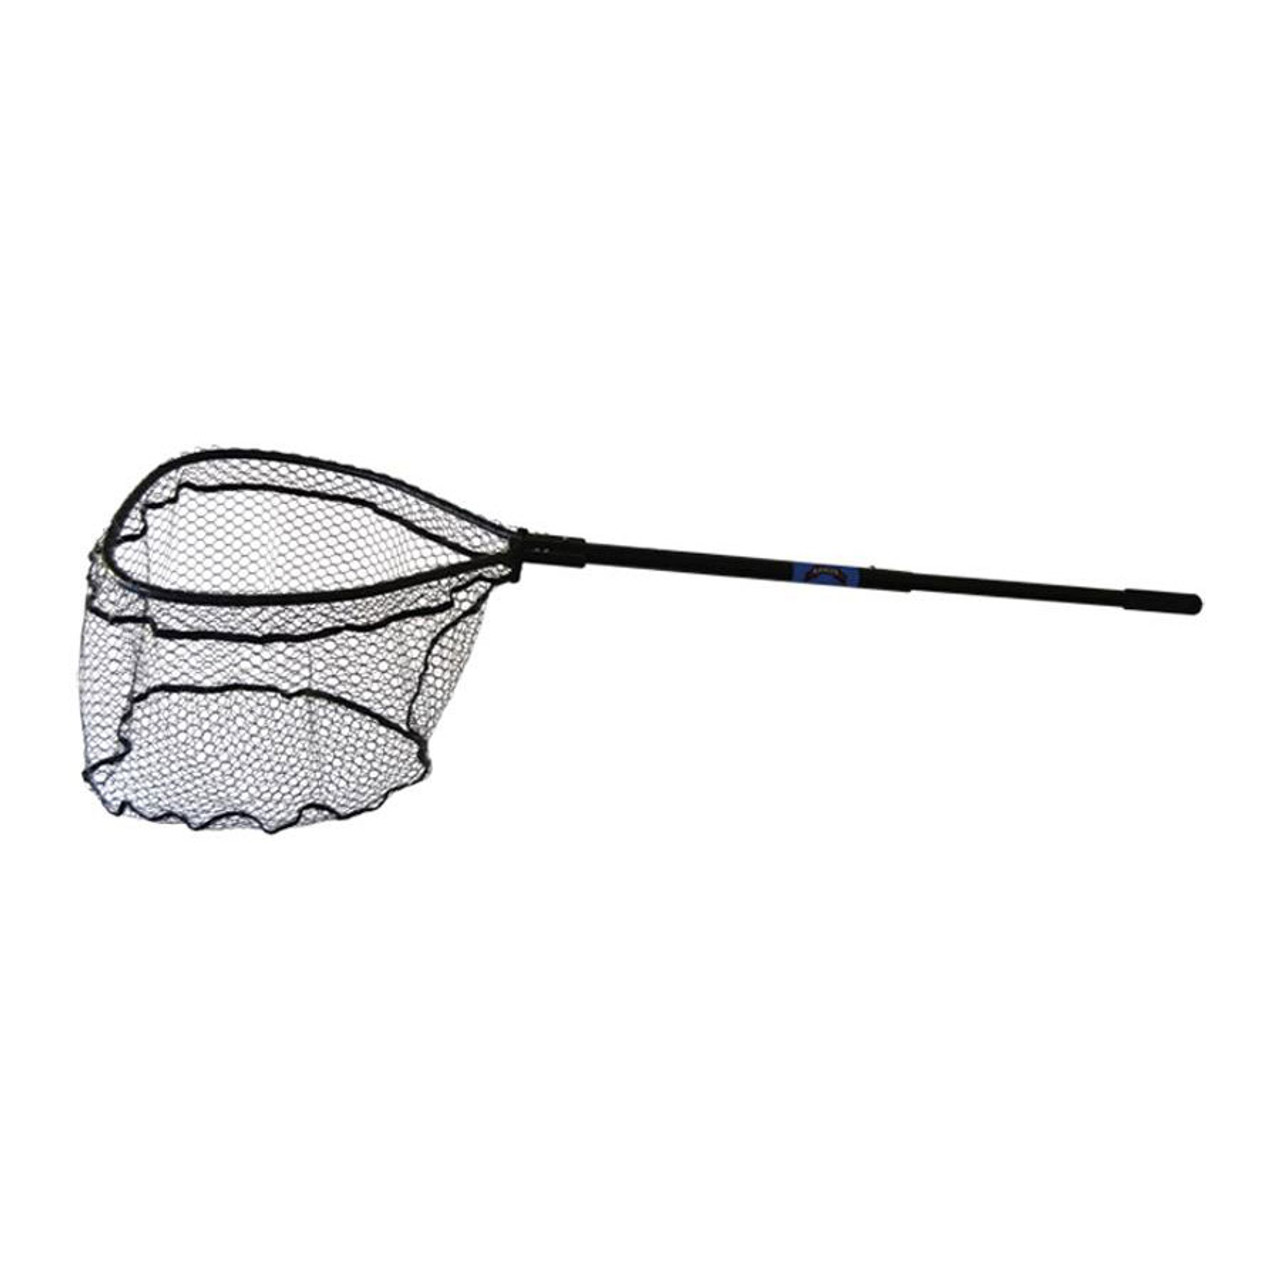 RANGER 2242R RUBBER TROUT NET 12X16 8 - Fin Feather Fur Outfitters